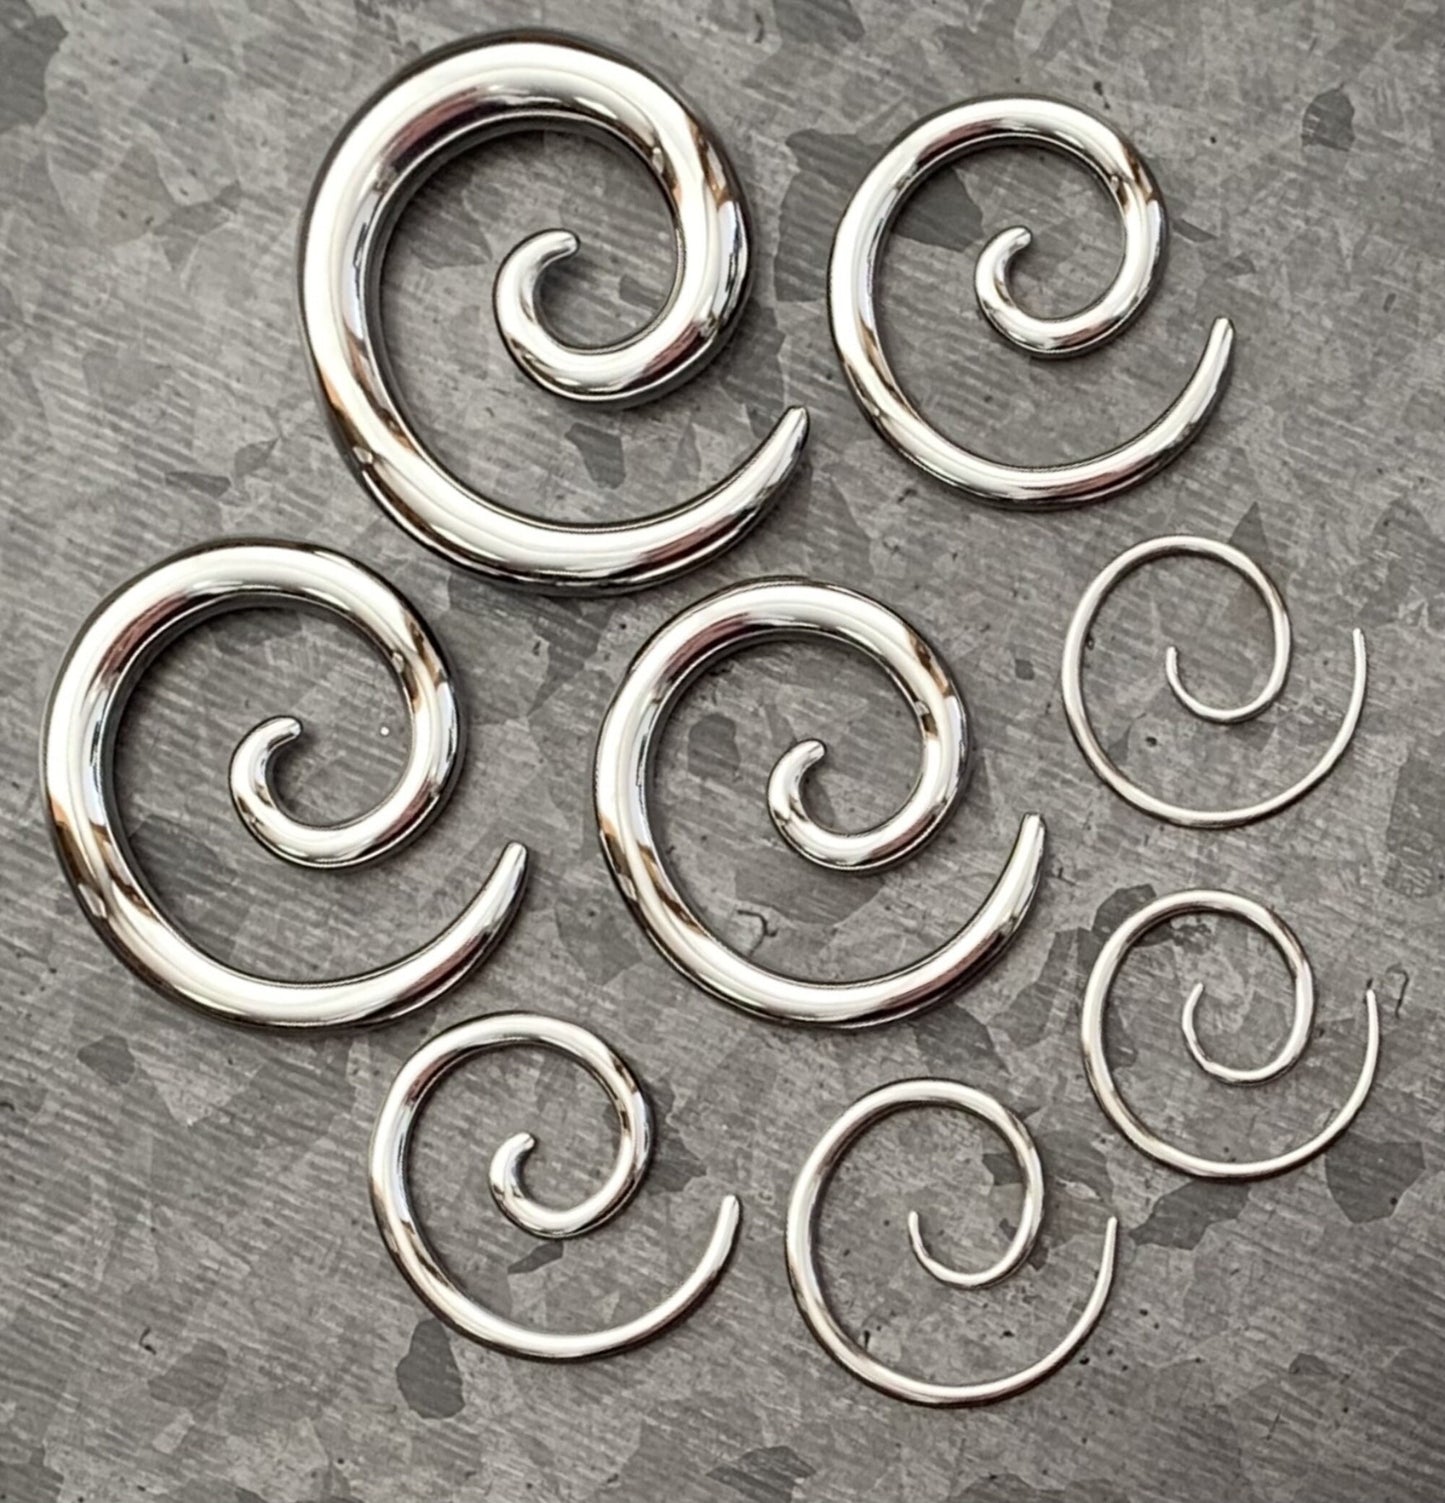 PAIR of Unique Stainless Steel Spiral Tapers Expanders - Gauges 14g thru 0g (8mm) available!